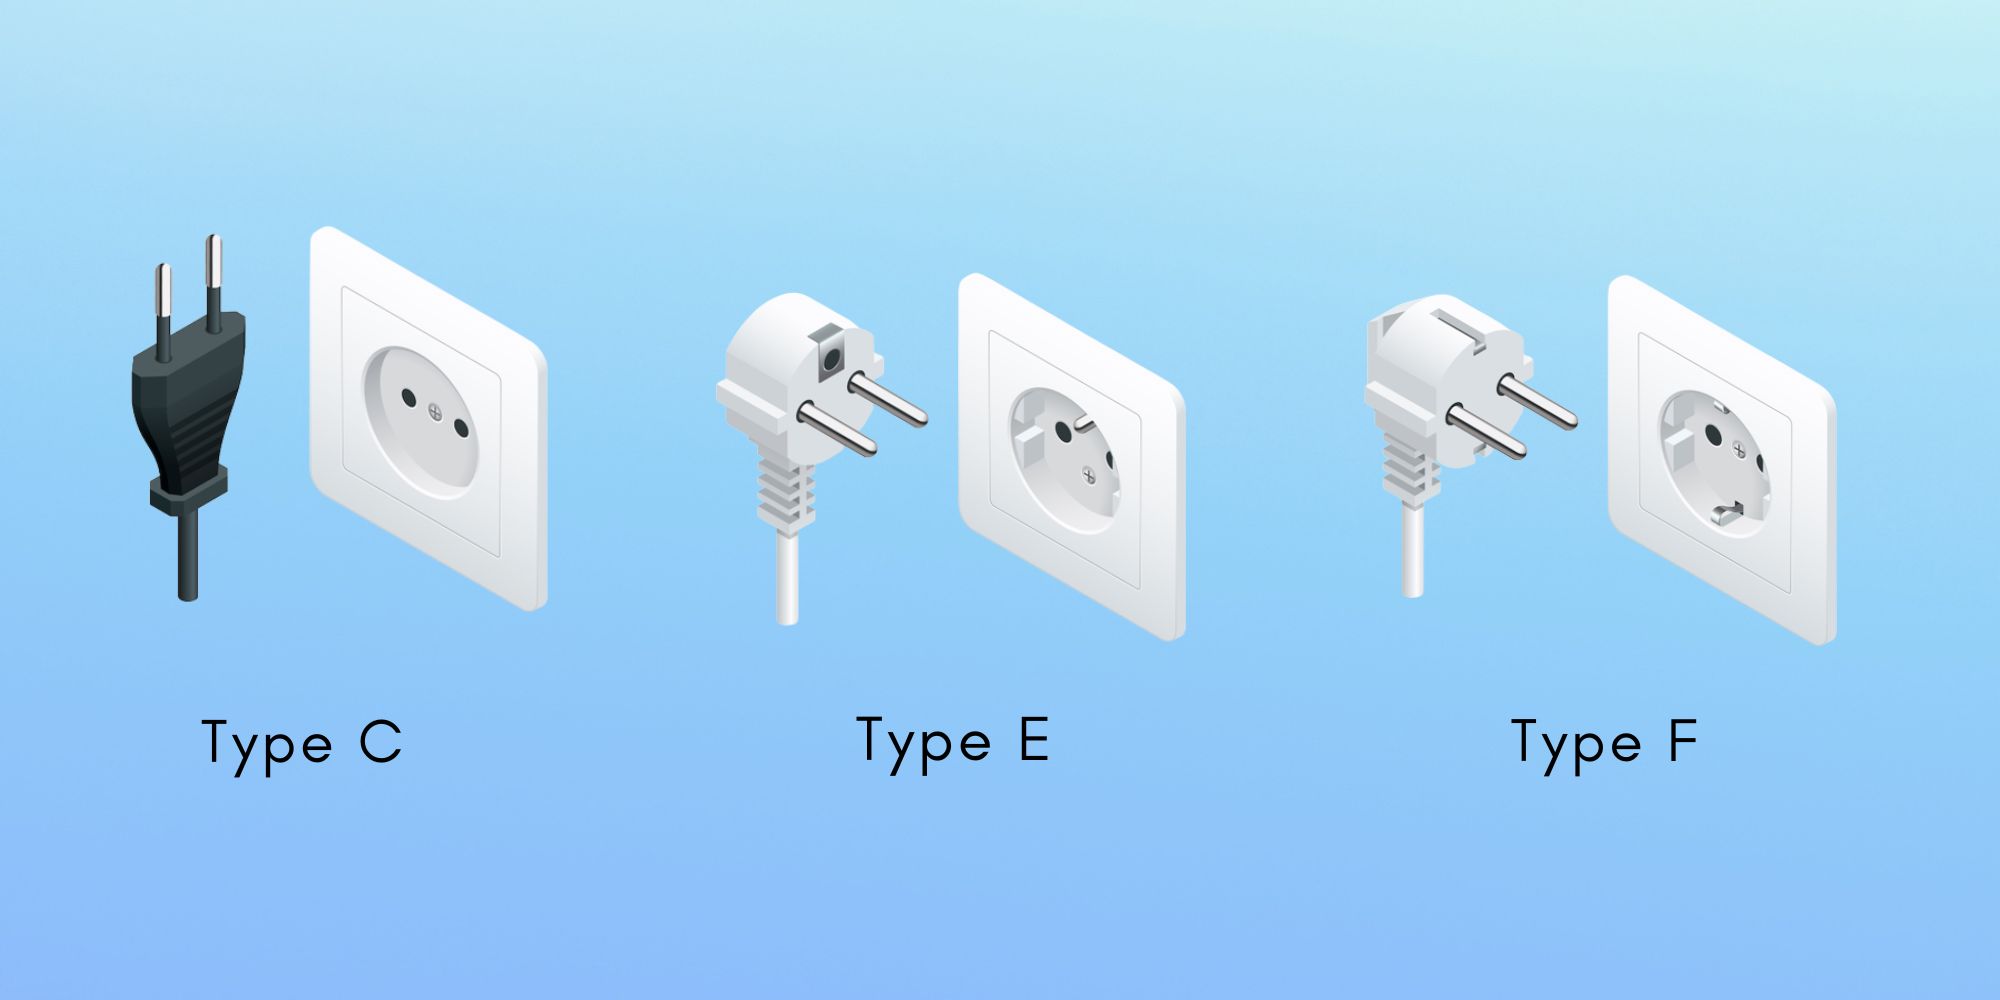 Monaco Power Plugs and Sockets: Type C, Type E, and Type F
